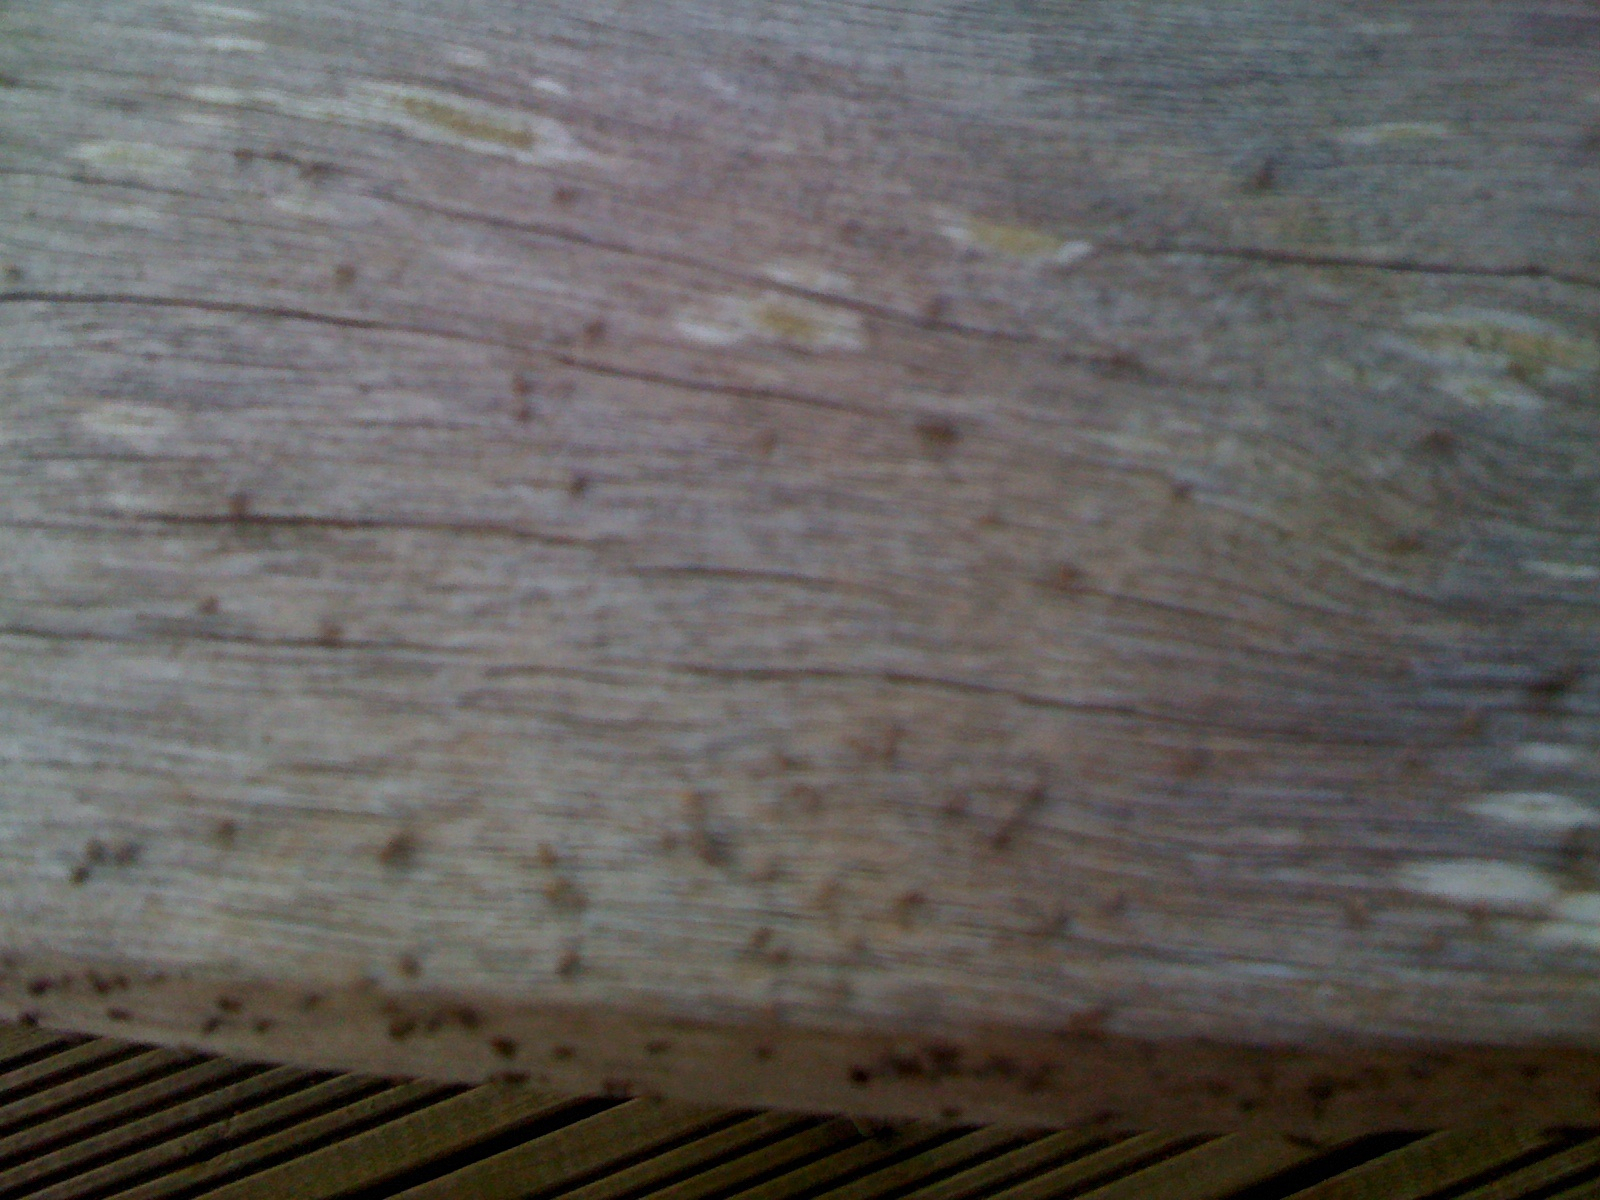 Tiny Bugs In Wood Furniture Furniture Home Decor within dimensions 1600 X 1200